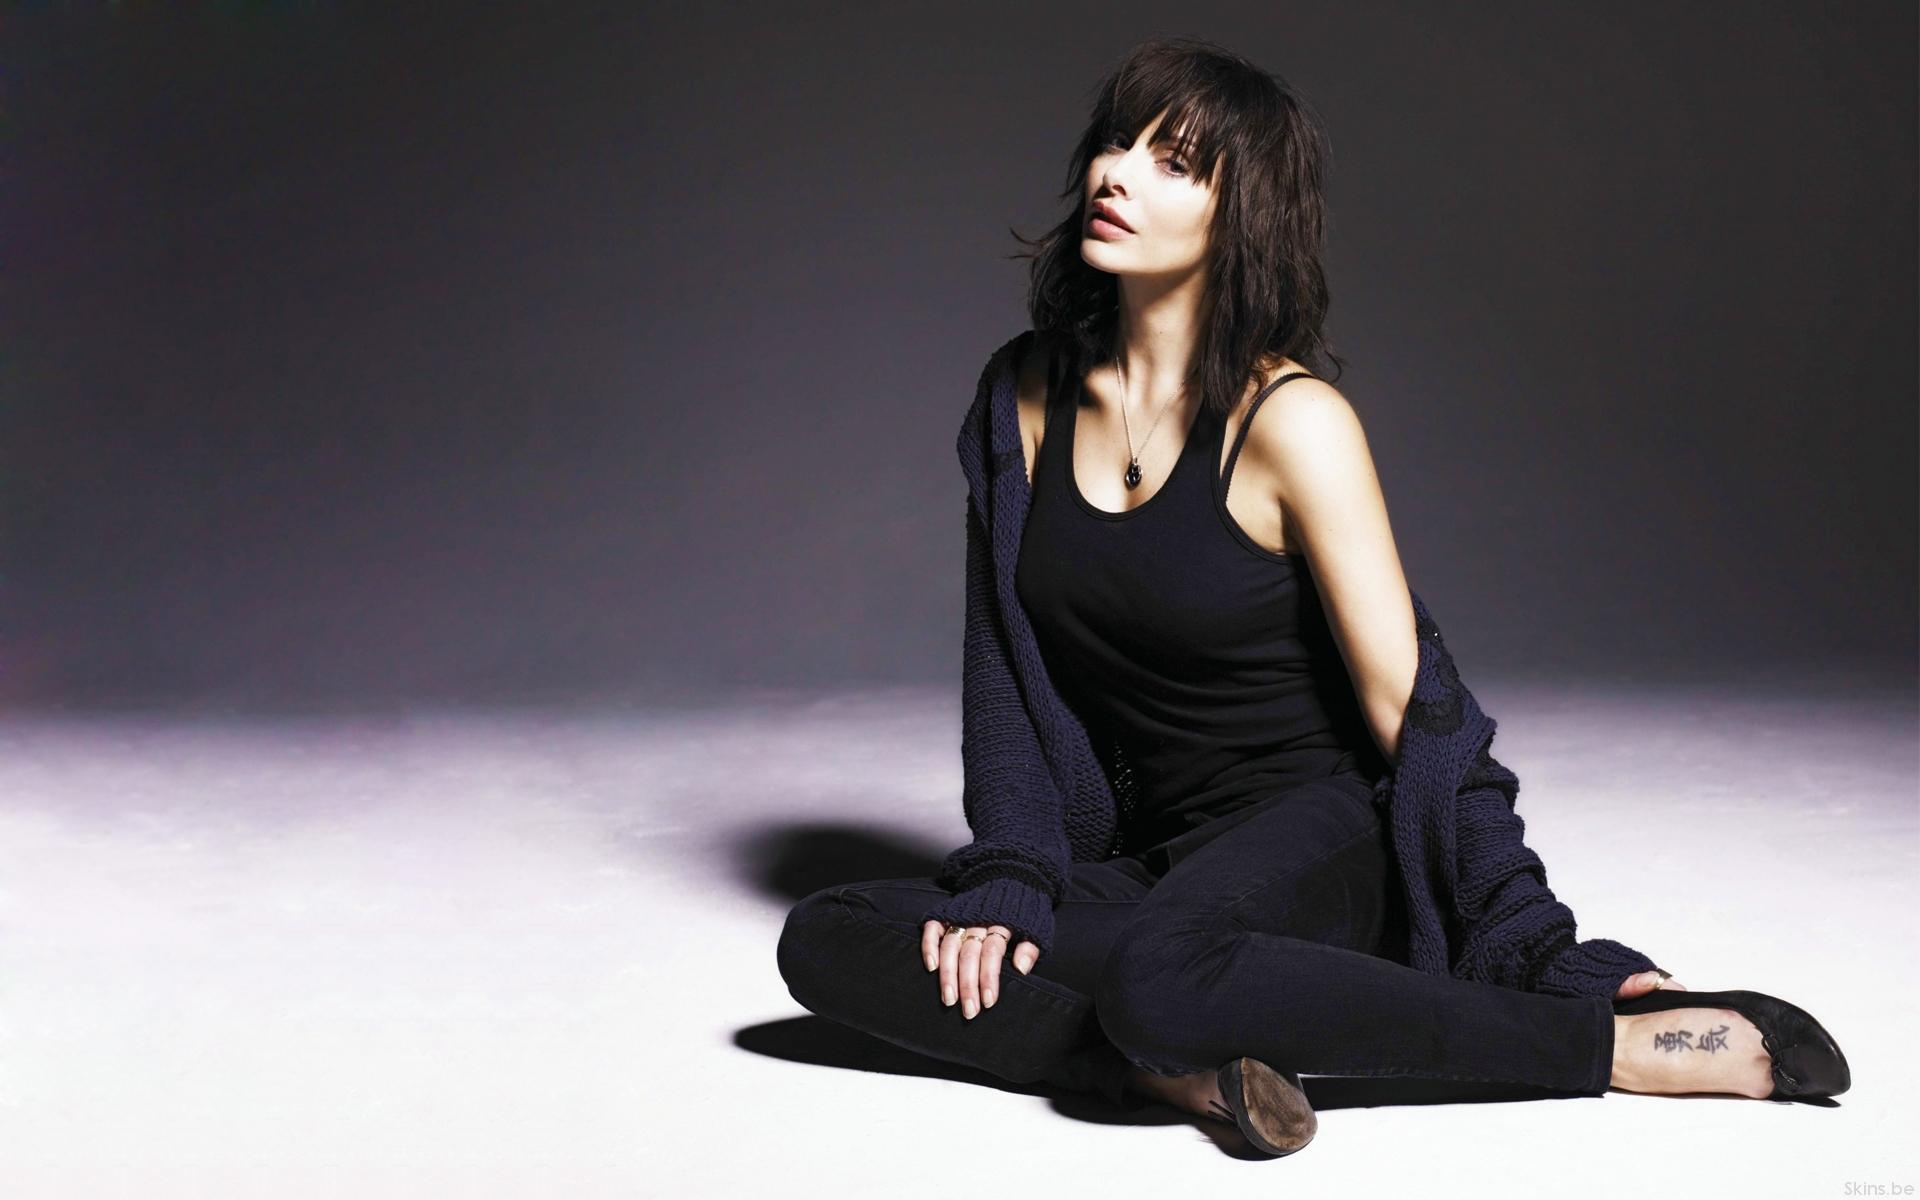 65+ Hot Pictures Of Natalie Imbruglia Will Get You Hot Under Your Collars | Best Of Comic Books